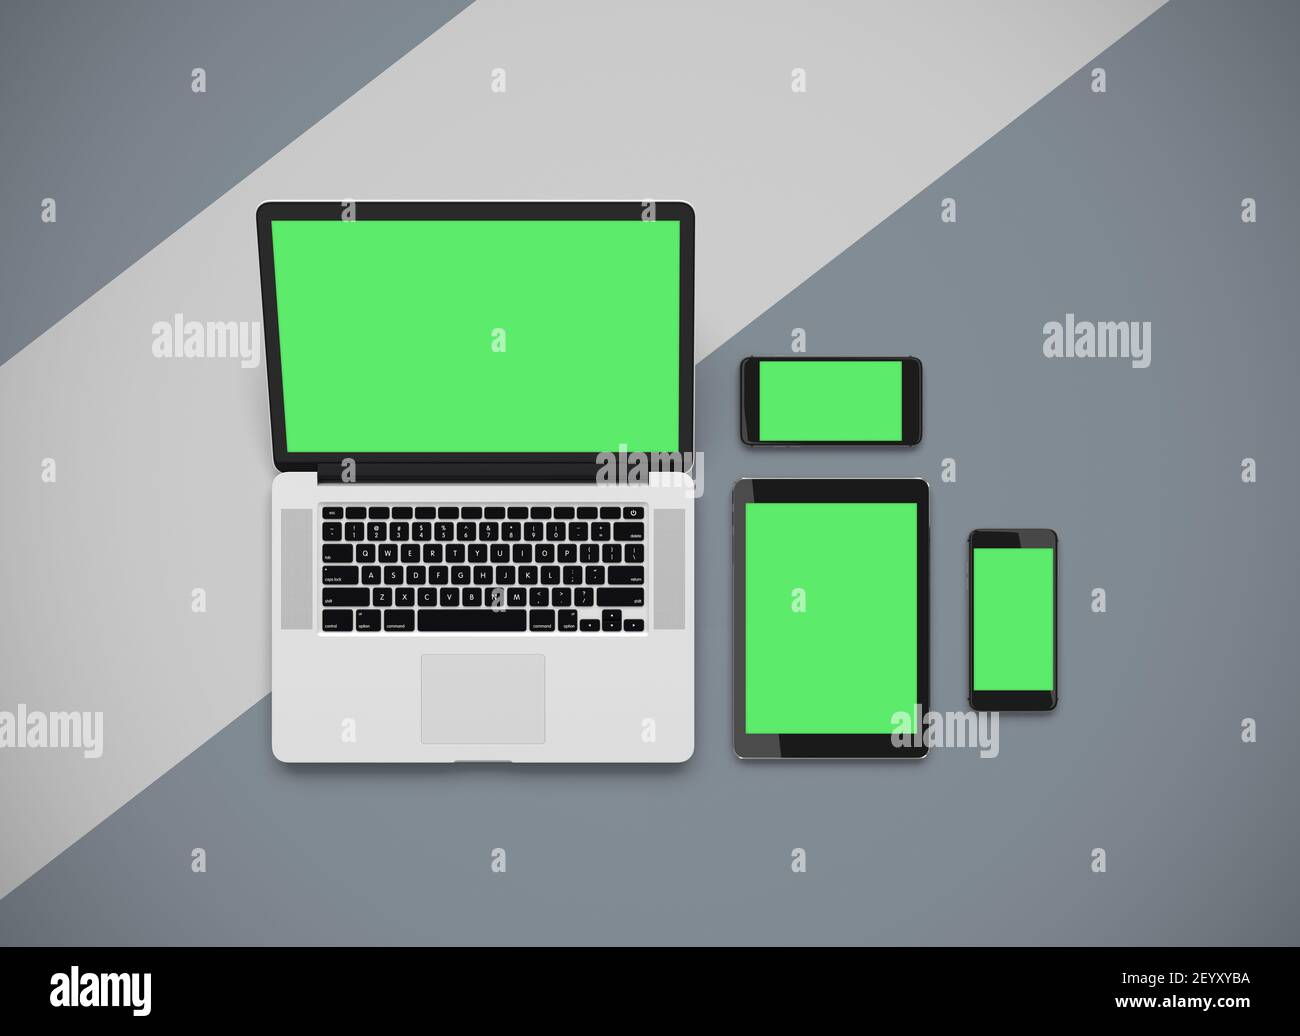 Responsive mockup of a laptop, digital tablet and smart phone. Stock Photo